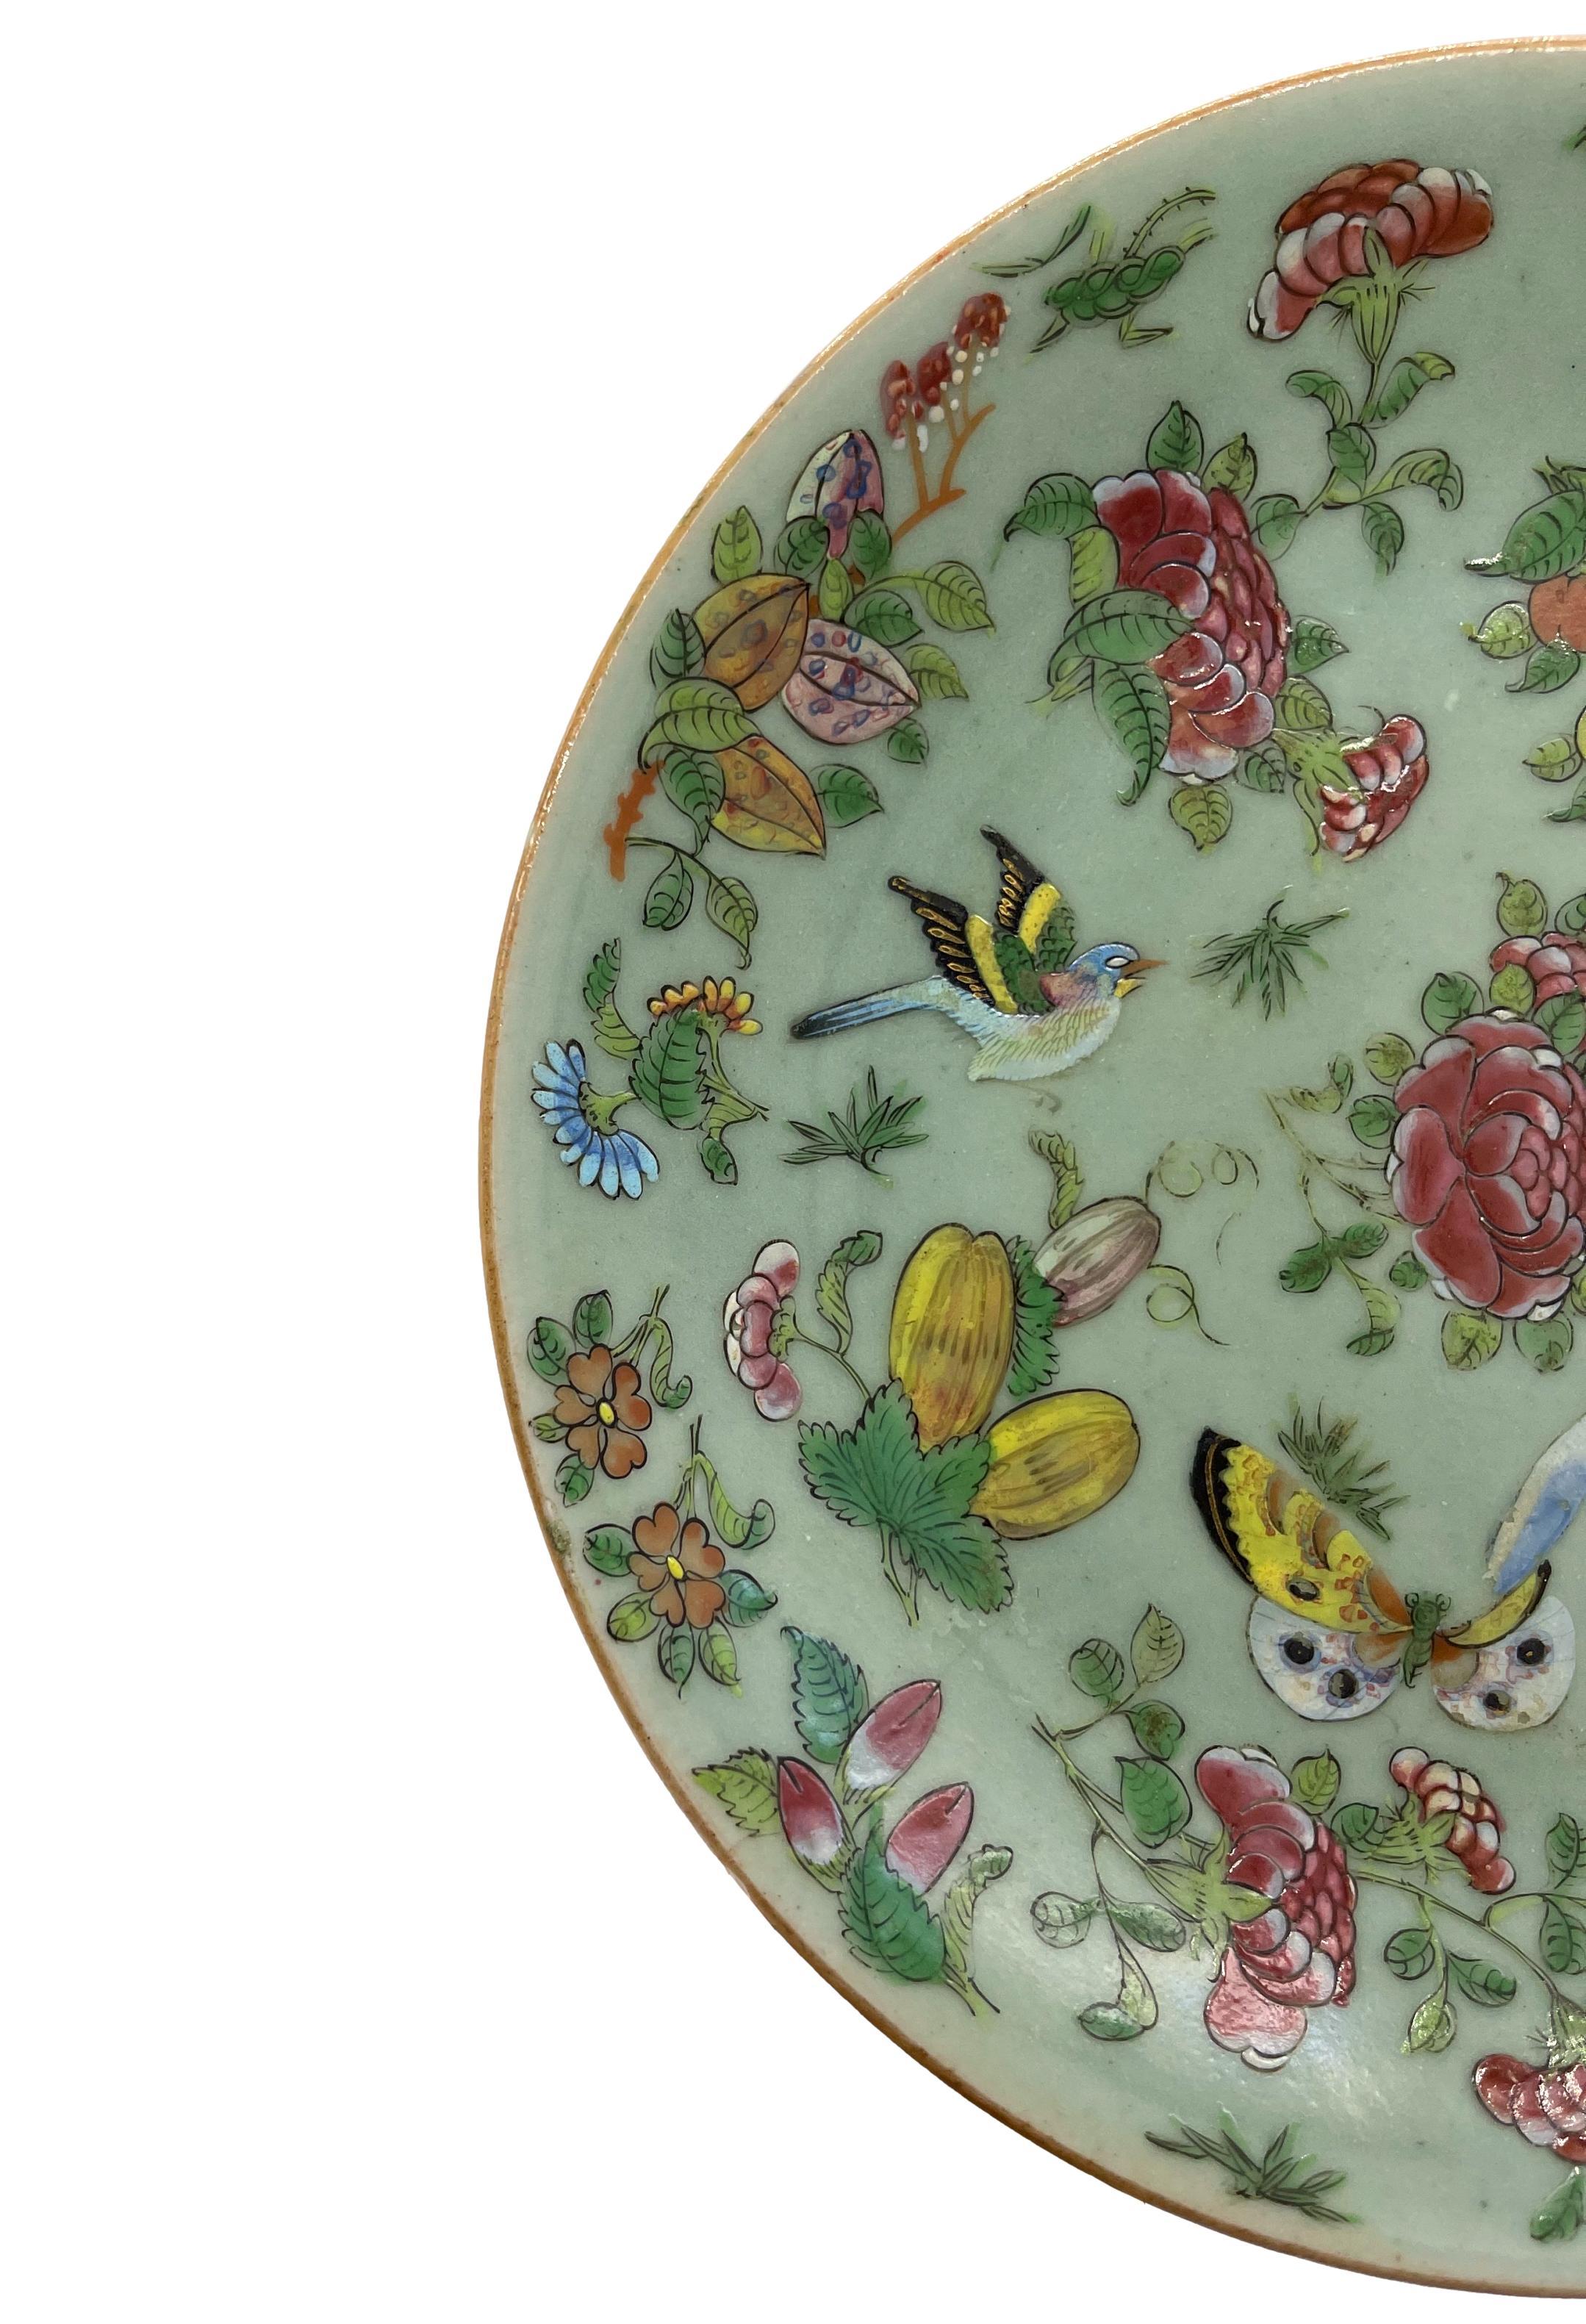 Chinese Export Porcelain Celadon Famille Rose 10-inch plate, Cantonese, Qing Dynasty, ca. 1850, profusely decorated in polychrome enamels depicting pheasants, butterflies, fruit, and florals on a blue-green celadon ground, the reverse with